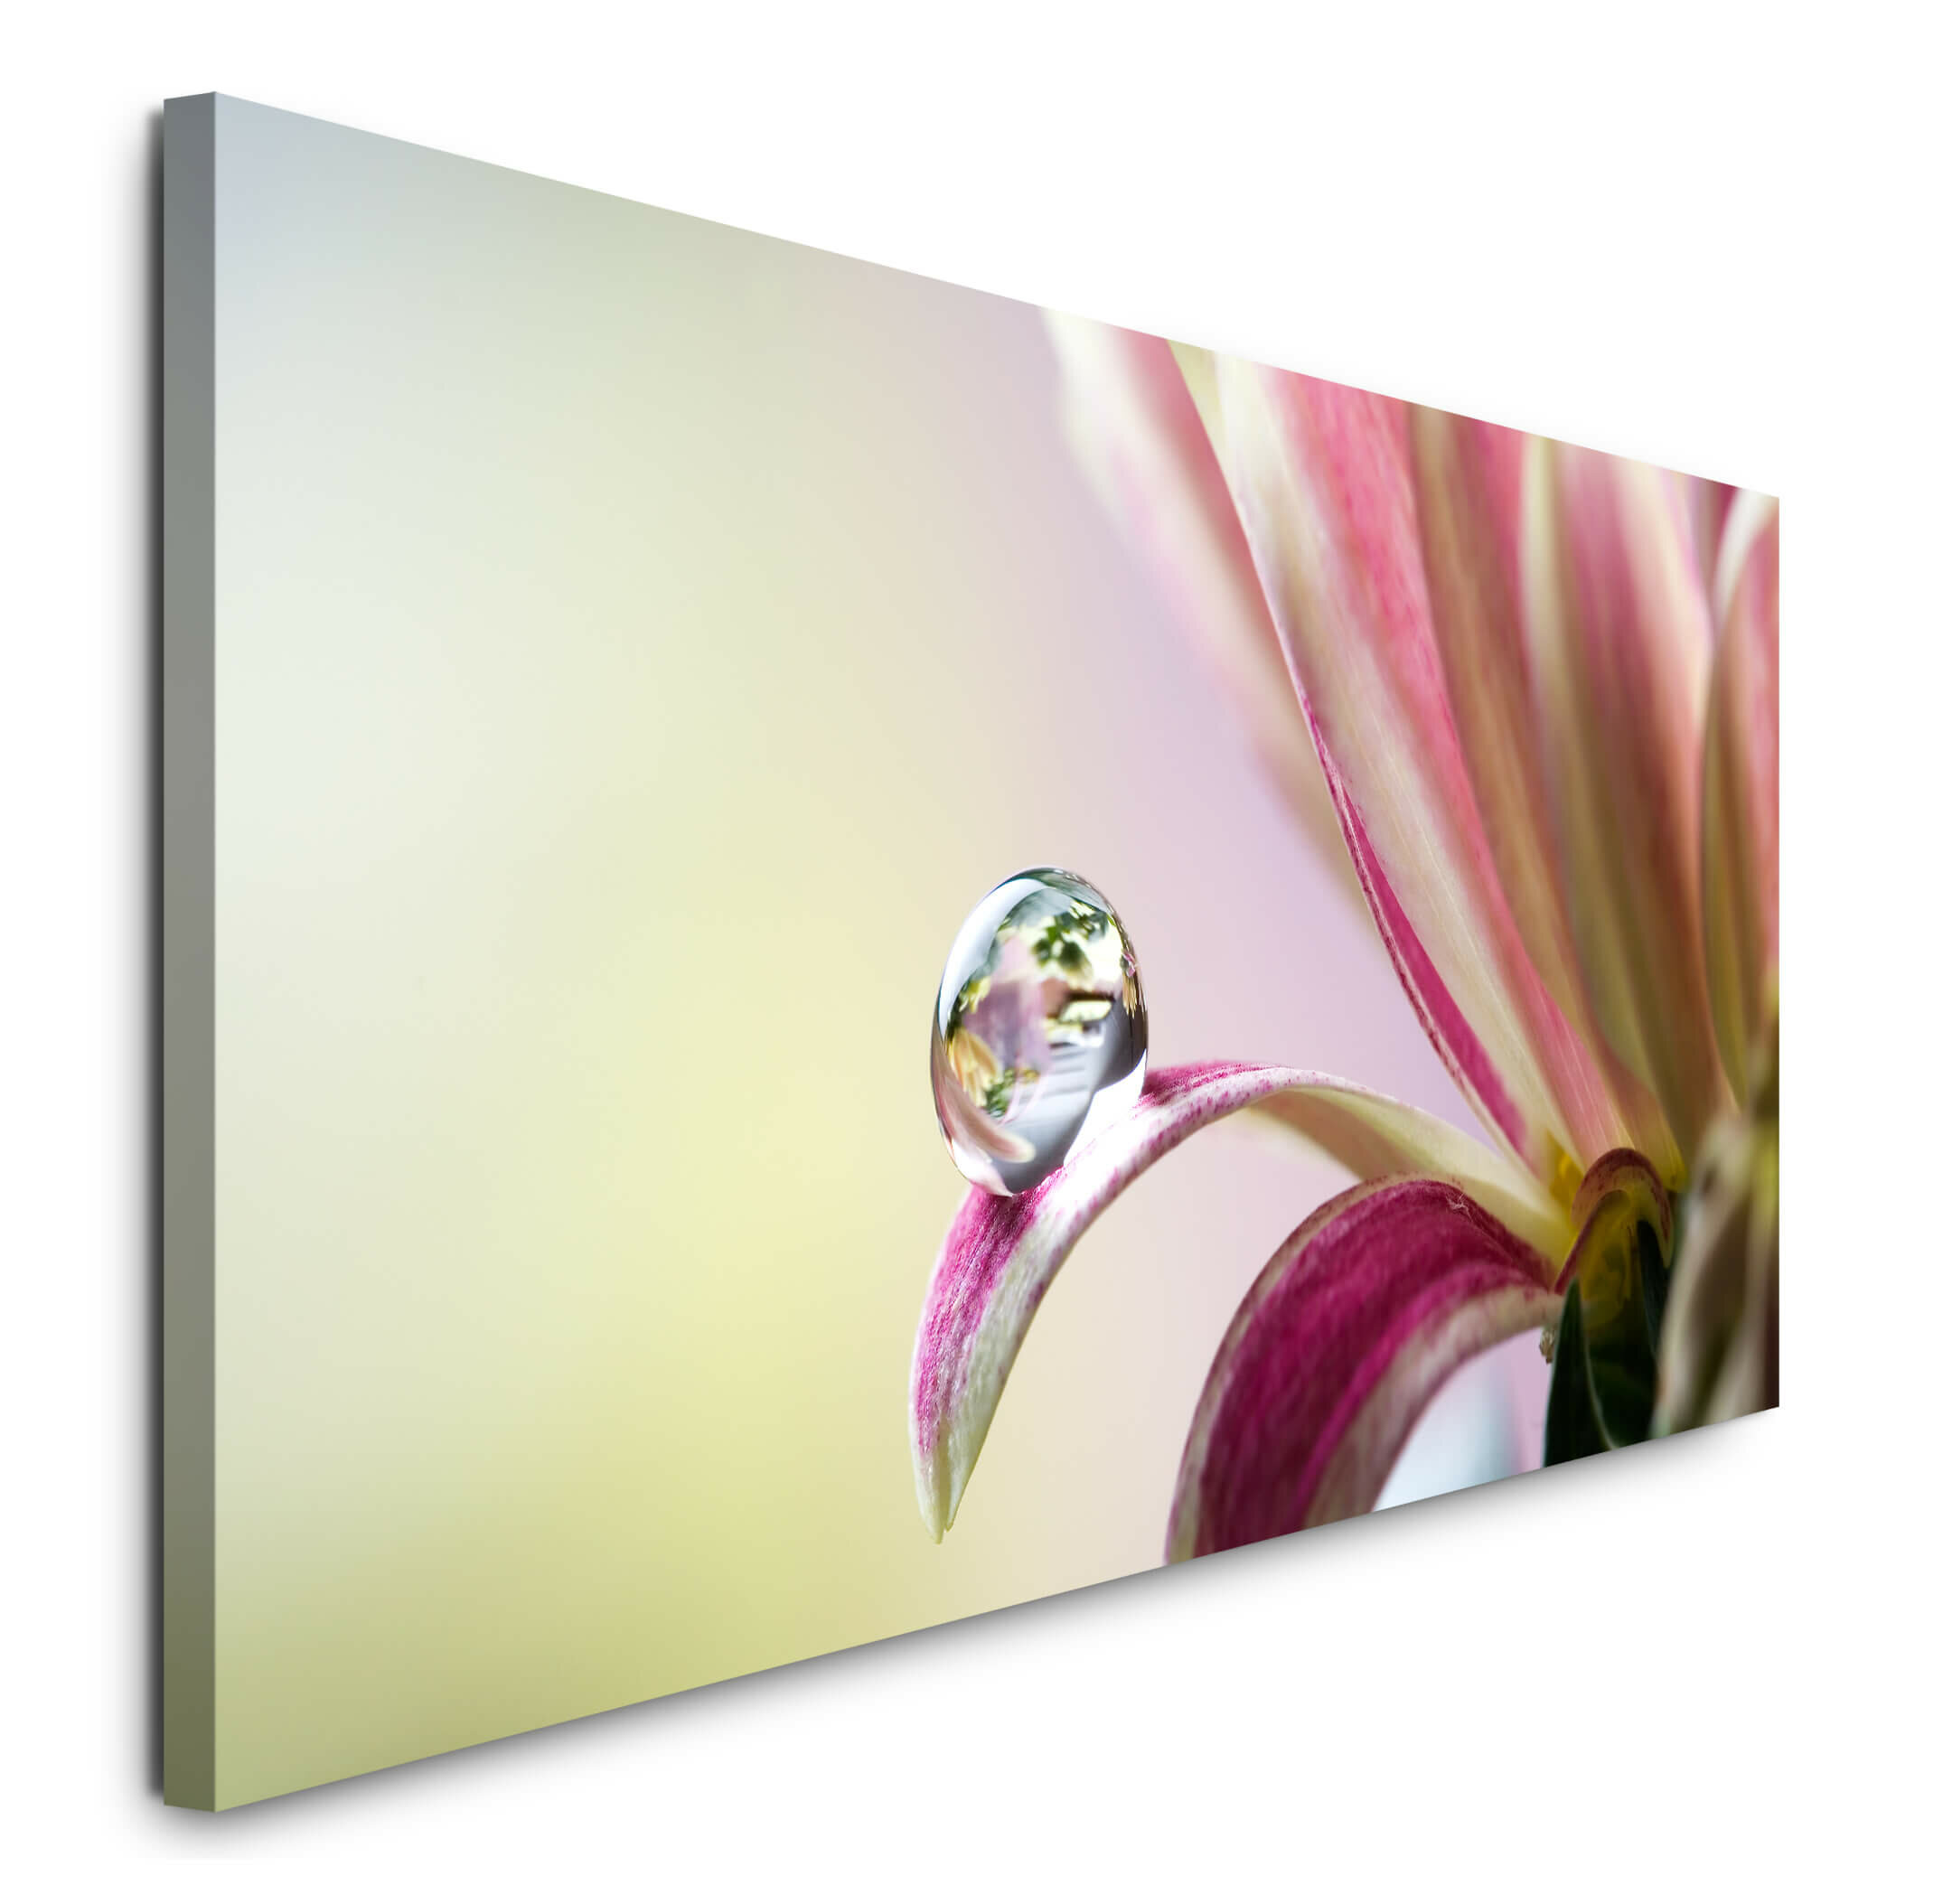 Chrysanthemum Flower with Water Droplets Photograph on Canvas